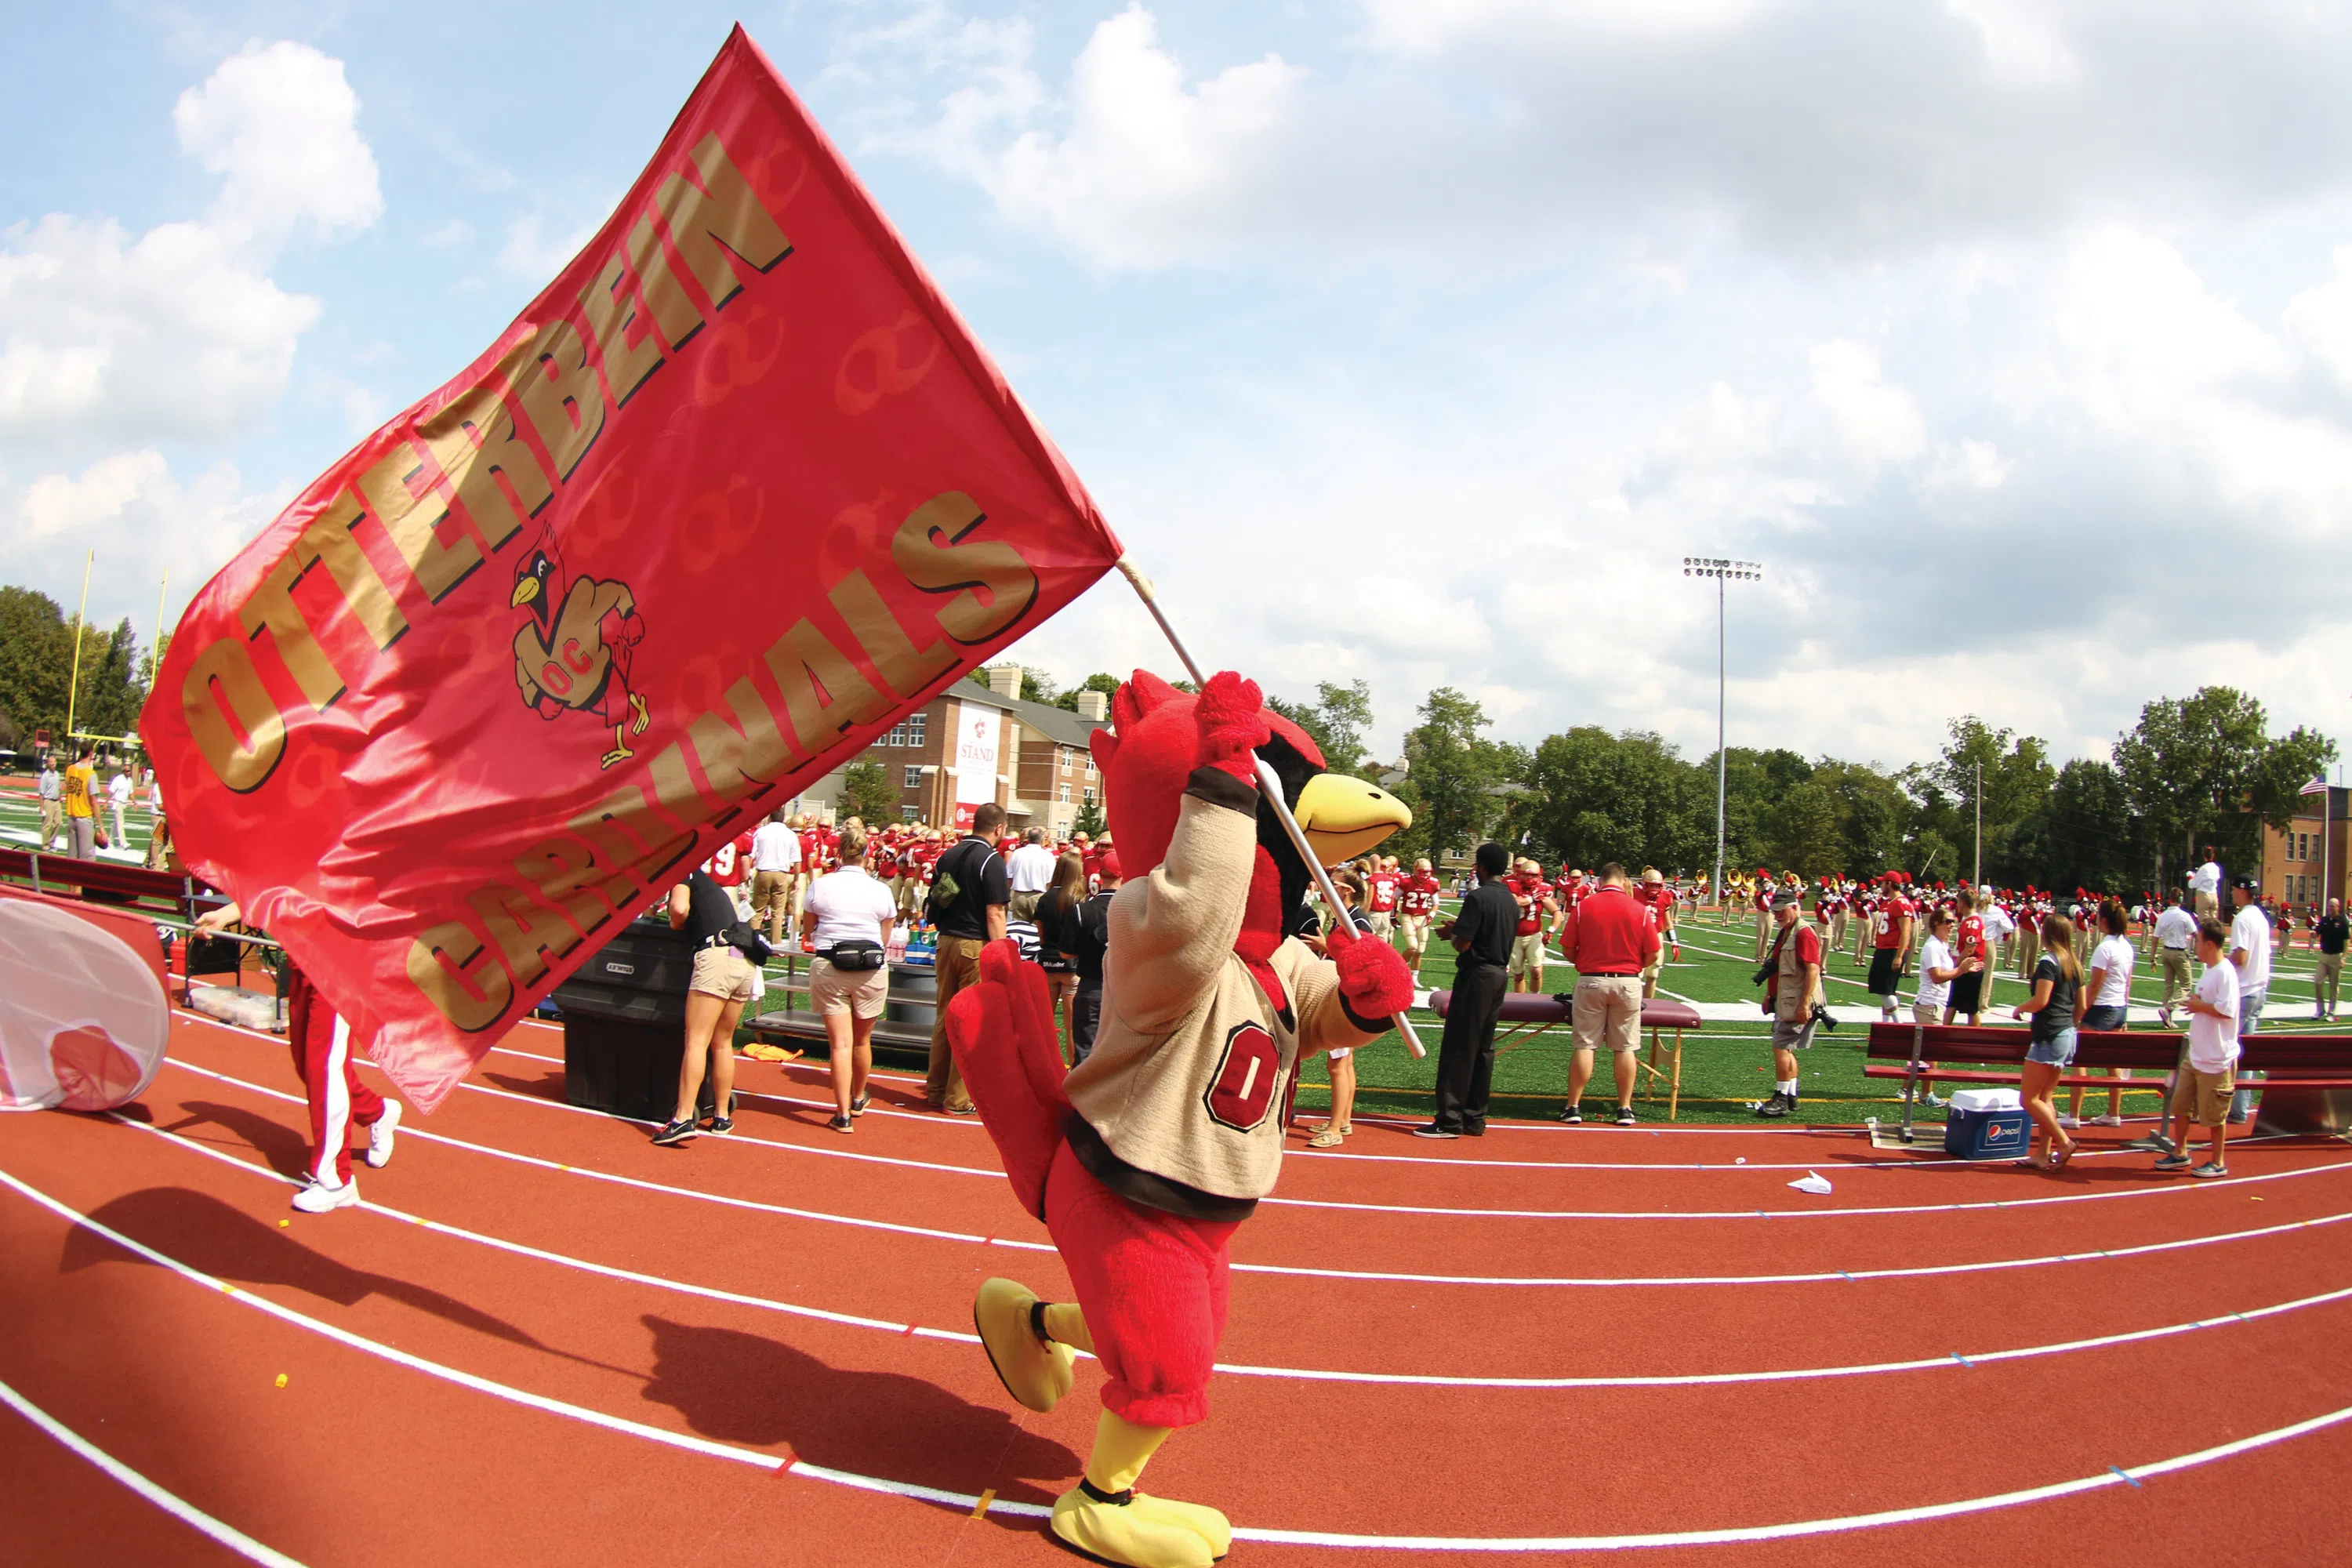 Cardy, Otterbein's Athletics Mascot runs on the track carrying our Athletics flag as a crowd looks on.